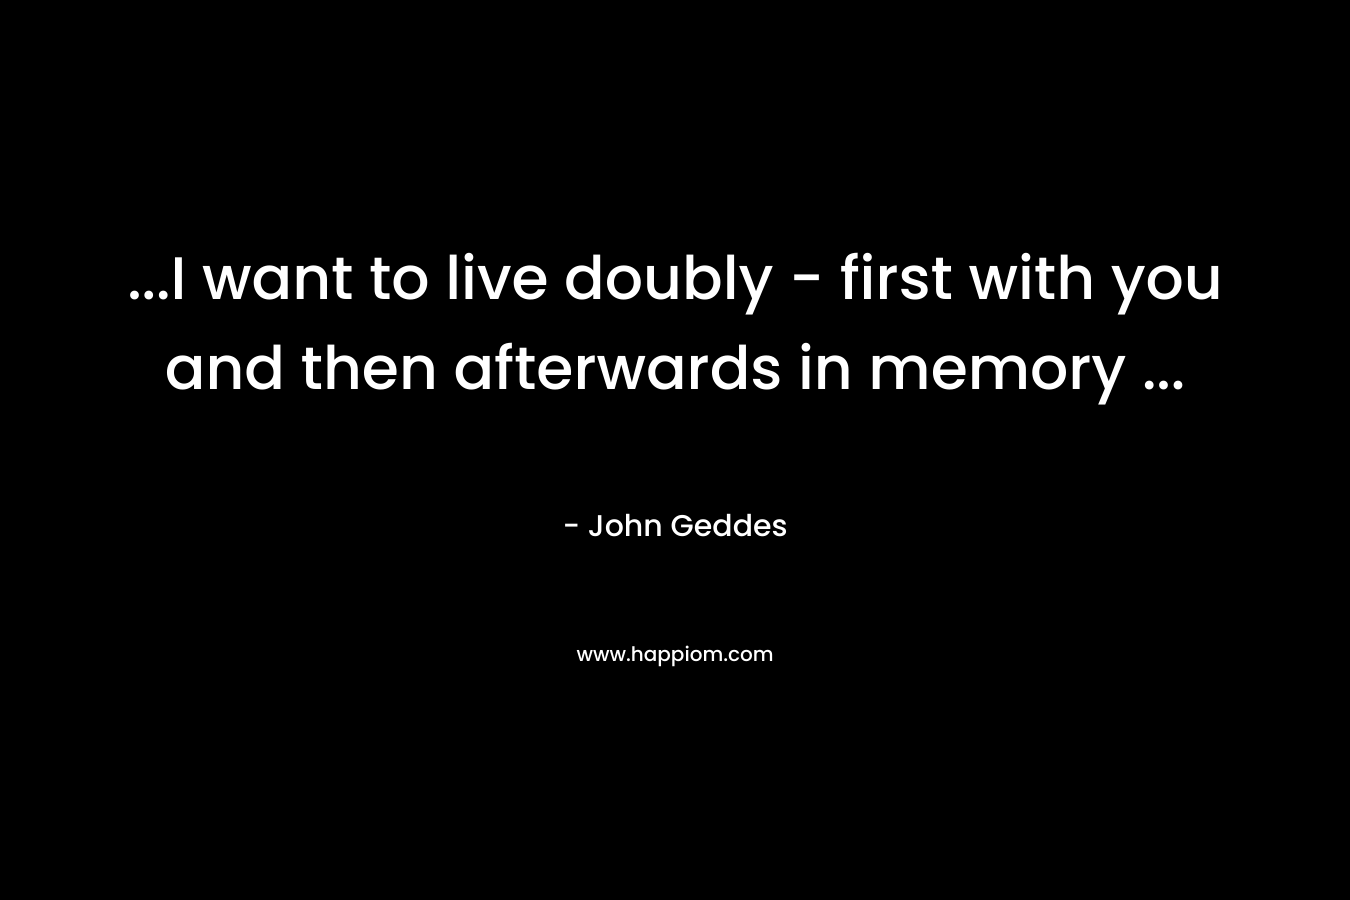 ...I want to live doubly - first with you and then afterwards in memory ...